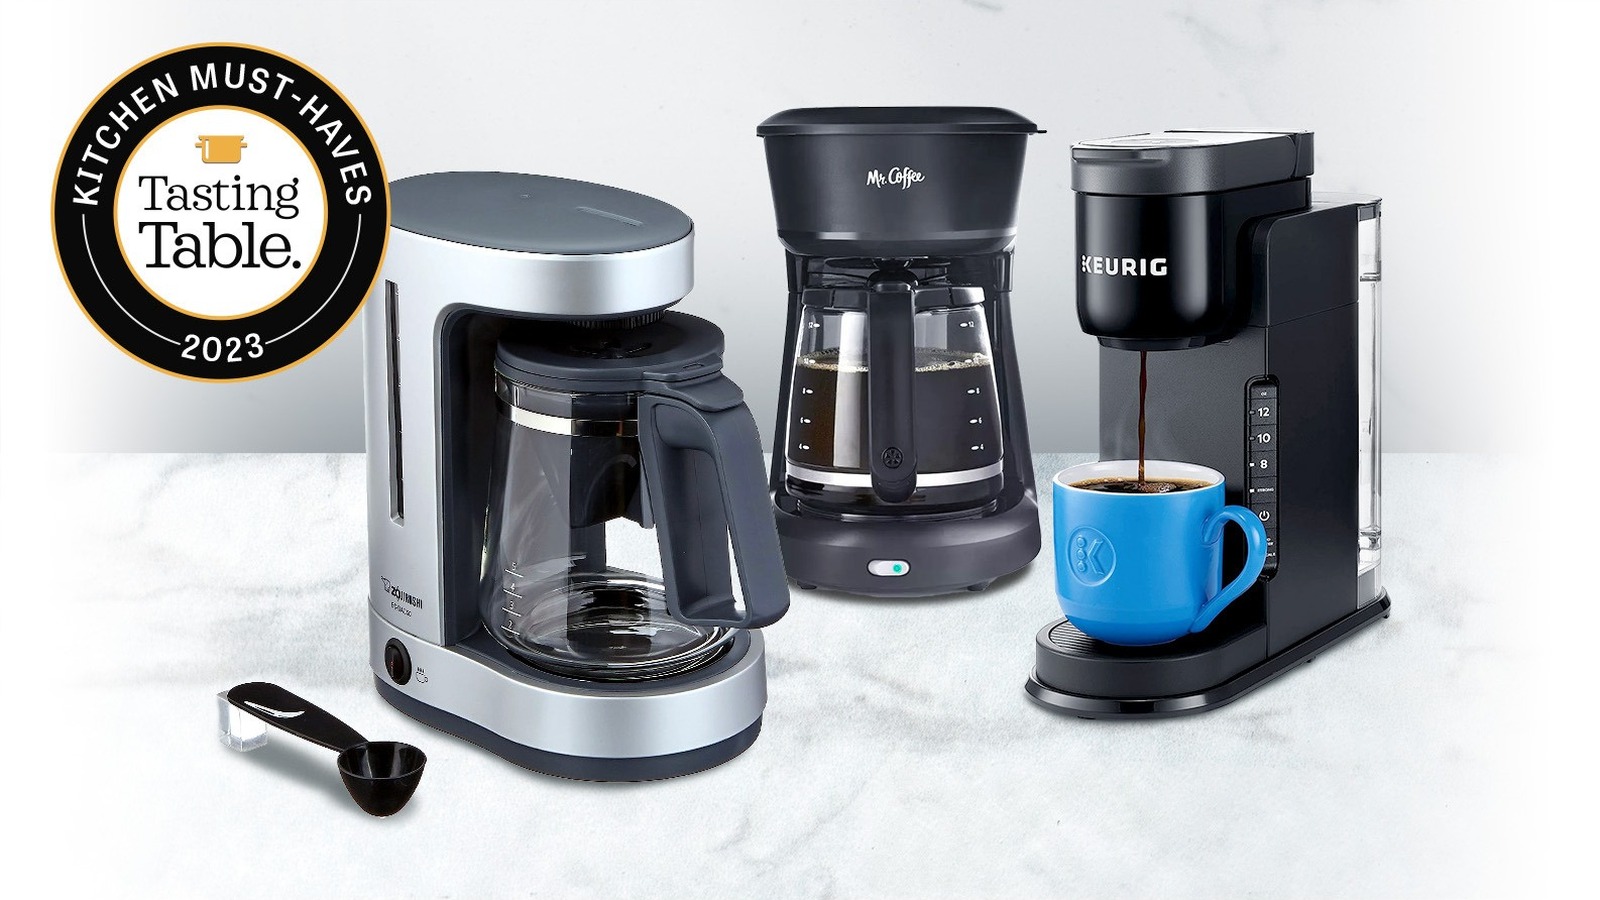 https://www.tastingtable.com/img/gallery/affordable-coffee-maker-the-2023-tasting-table-awards/l-intro-1690904097.jpg